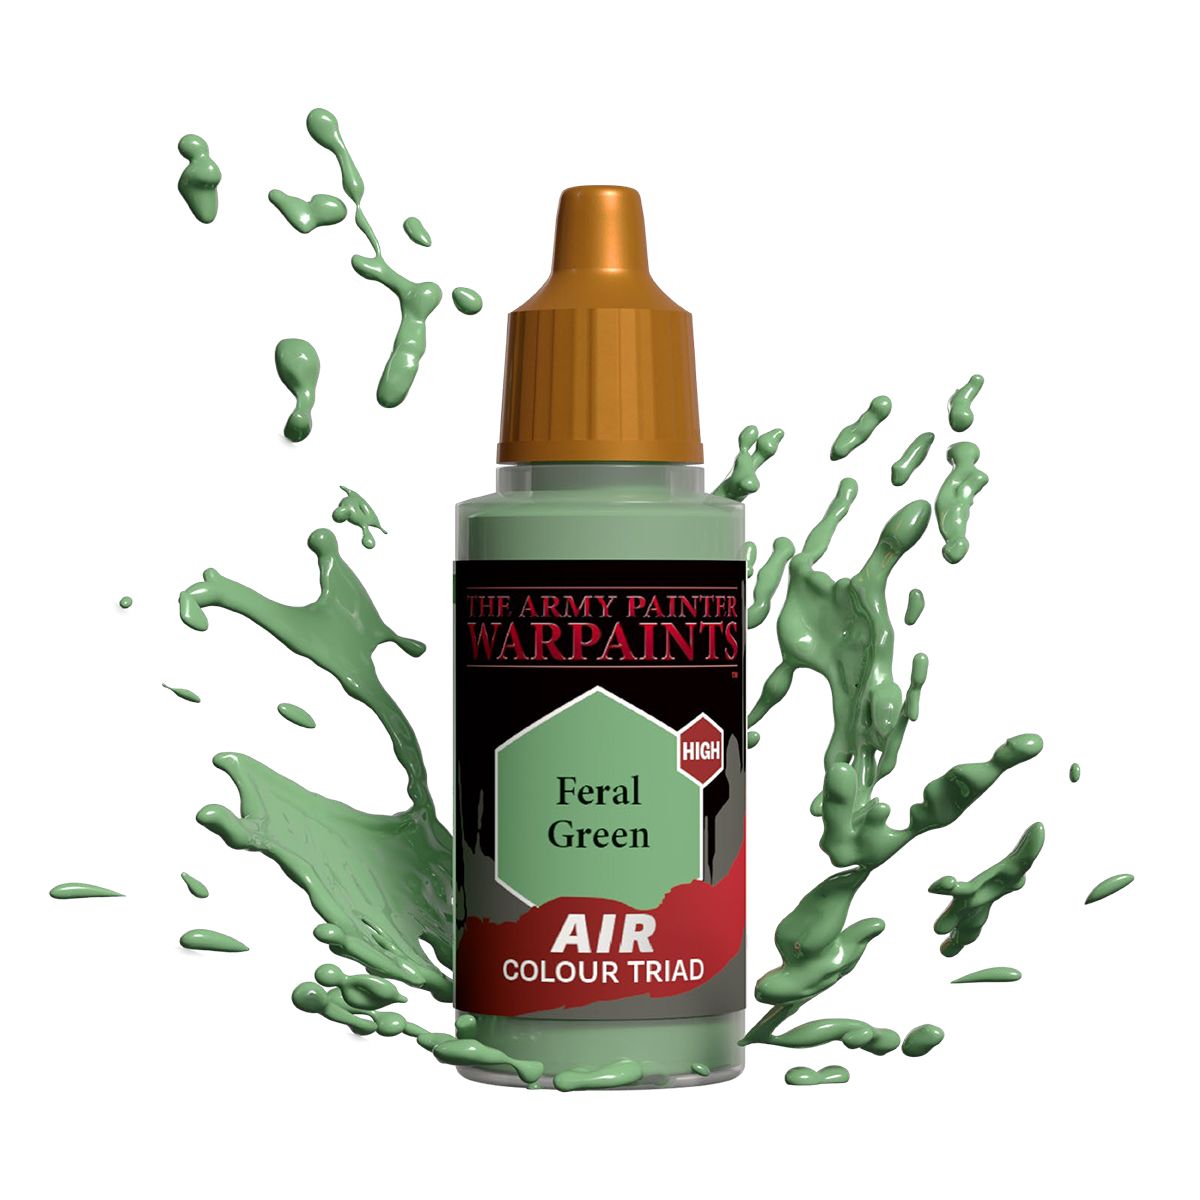 Army Painter Warpaints - Air Feral Green Acrylic Paint 18ml